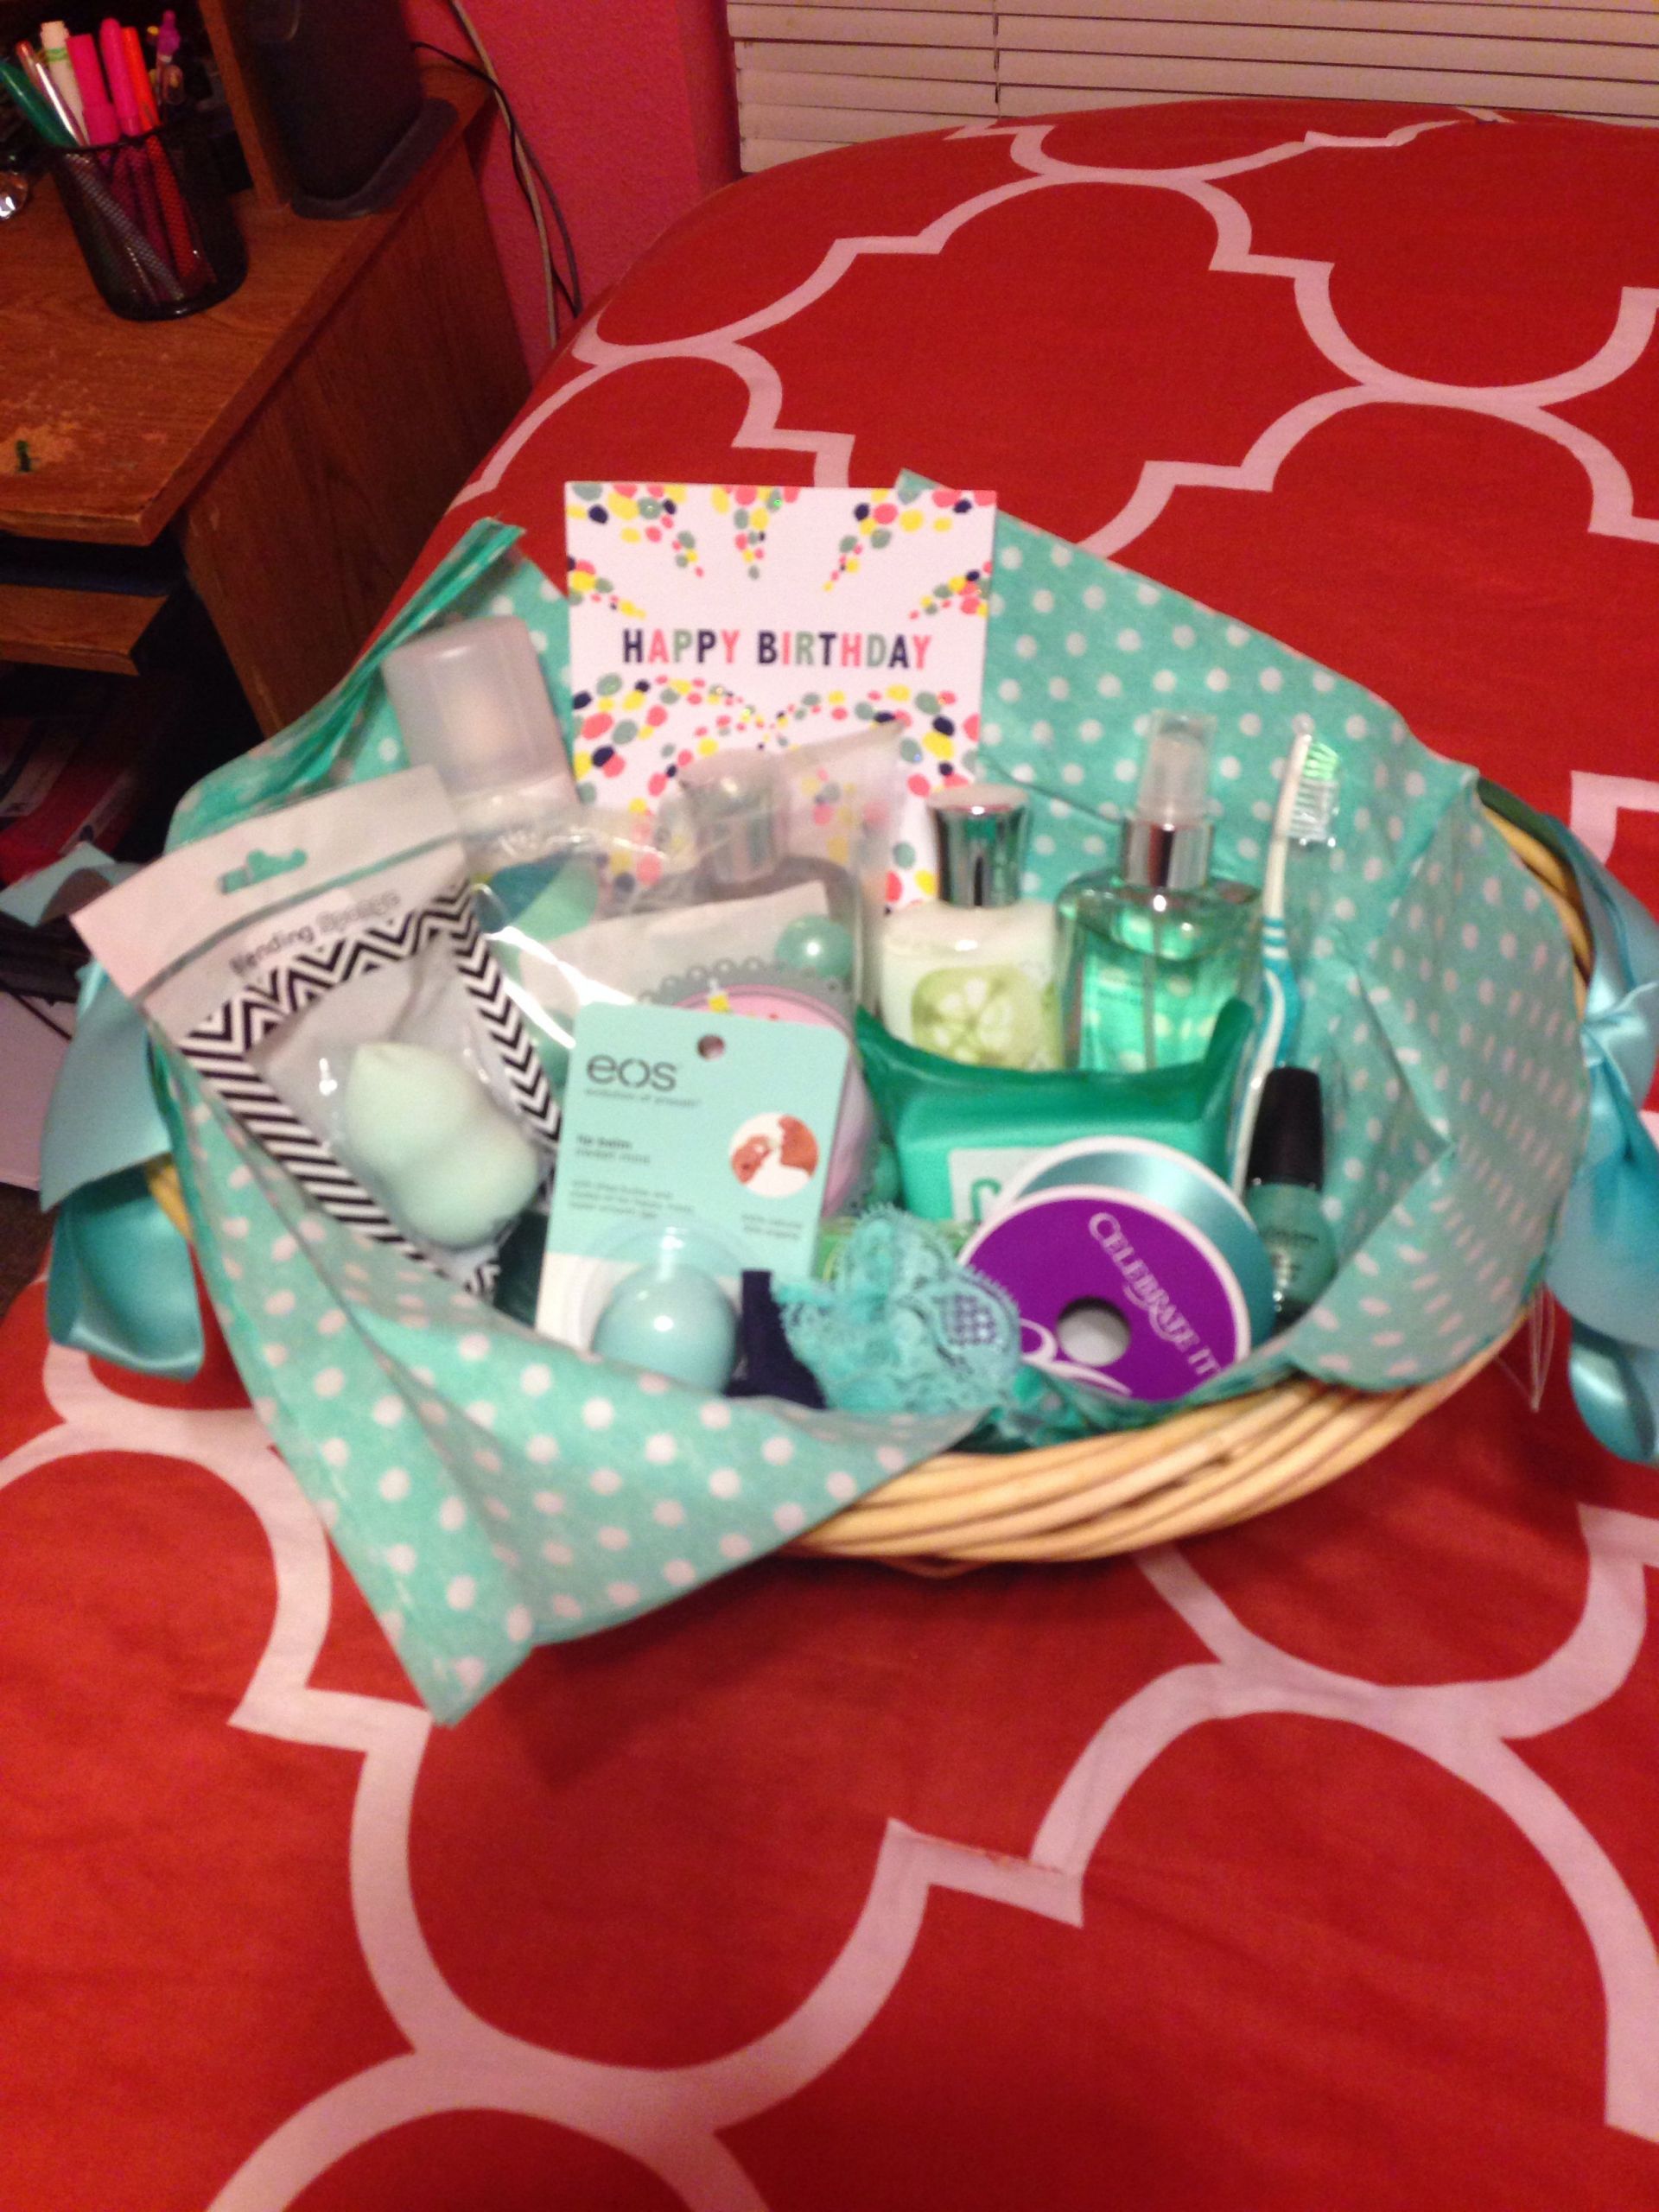 22 Ideas for Best Friend Birthday Gift Basket Ideas – Home, Family